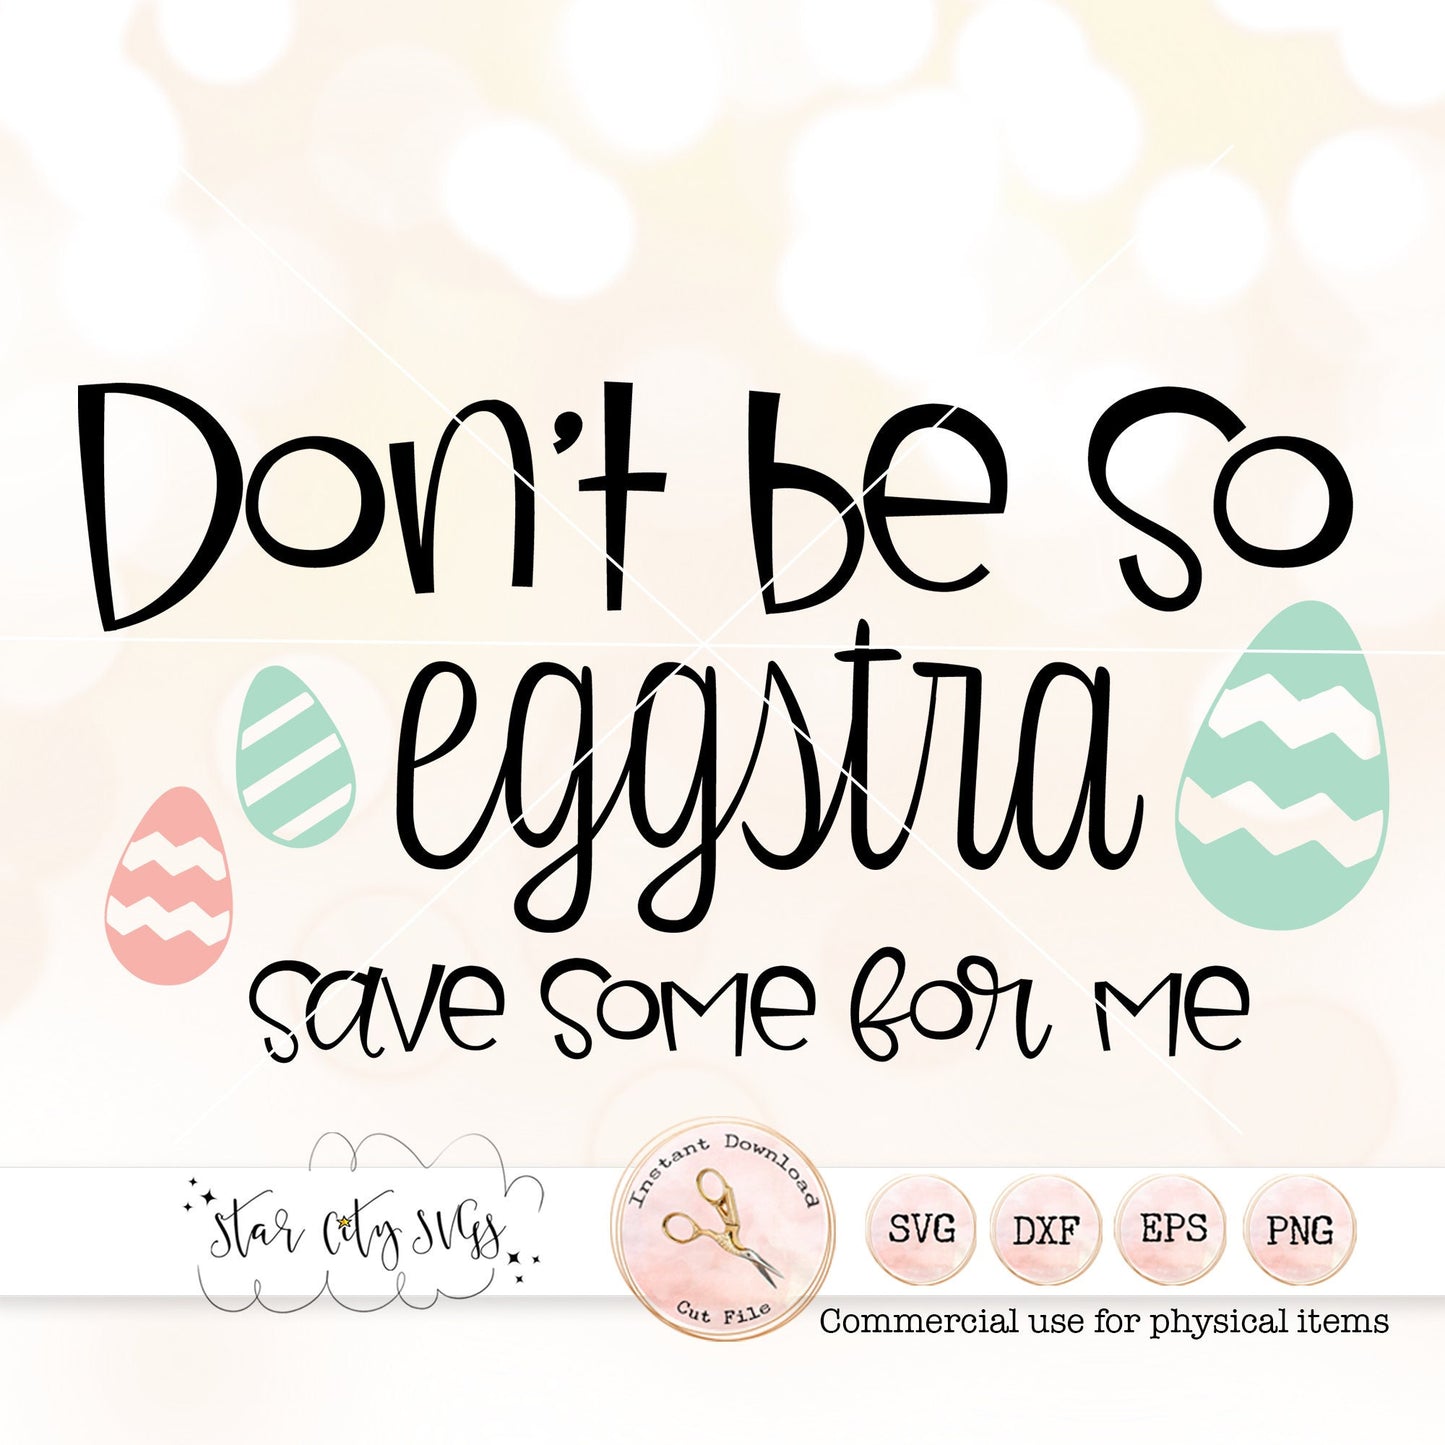 Funny Easter SVG - Don’t be so Eggstra Save some for me